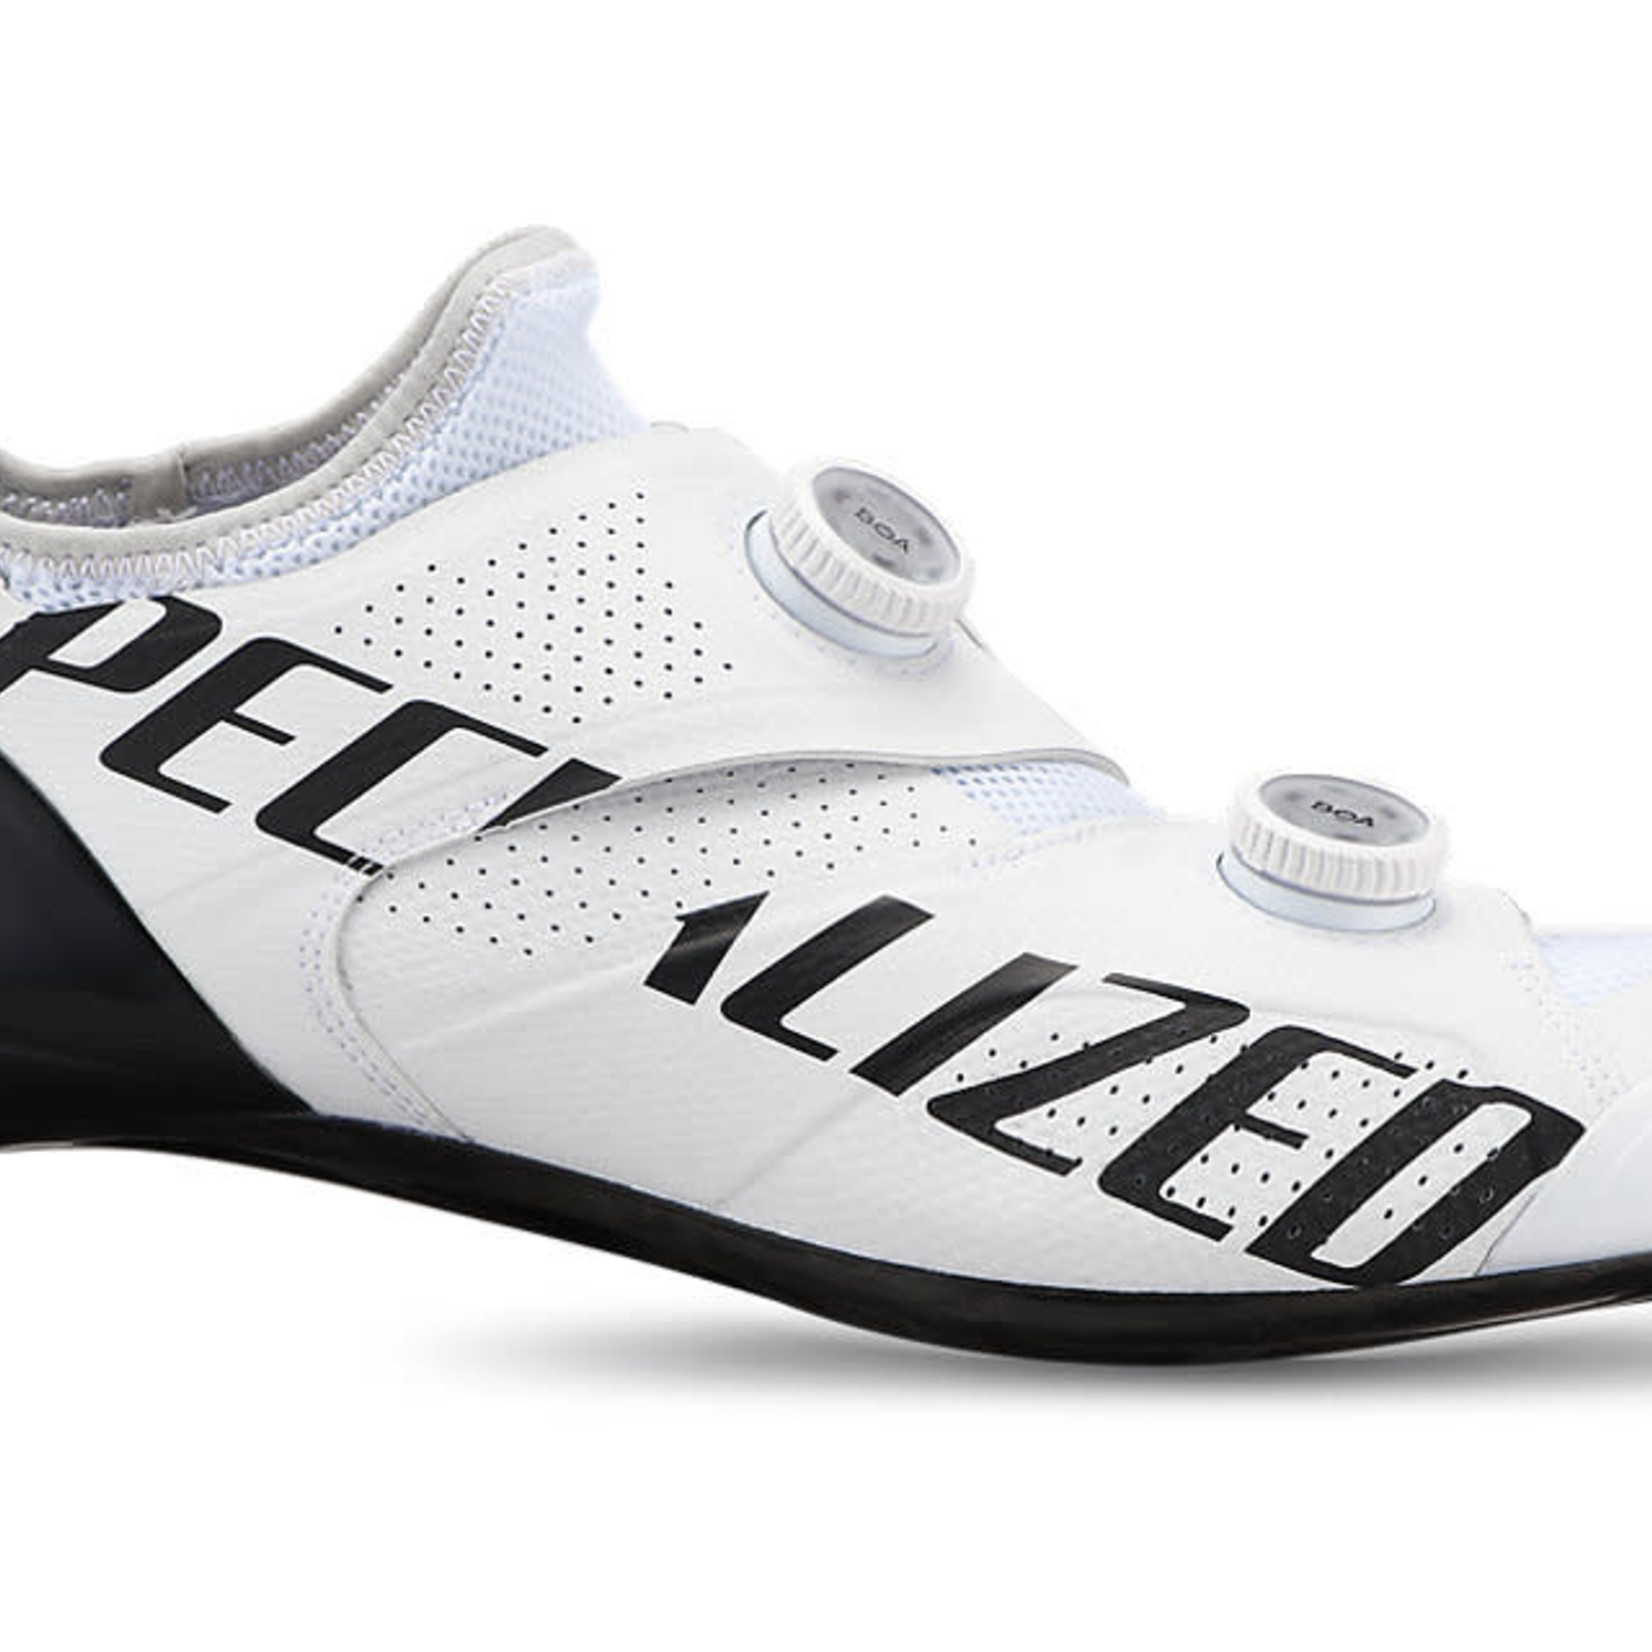 Specialized Specialized S-Works Ares Road Shoe